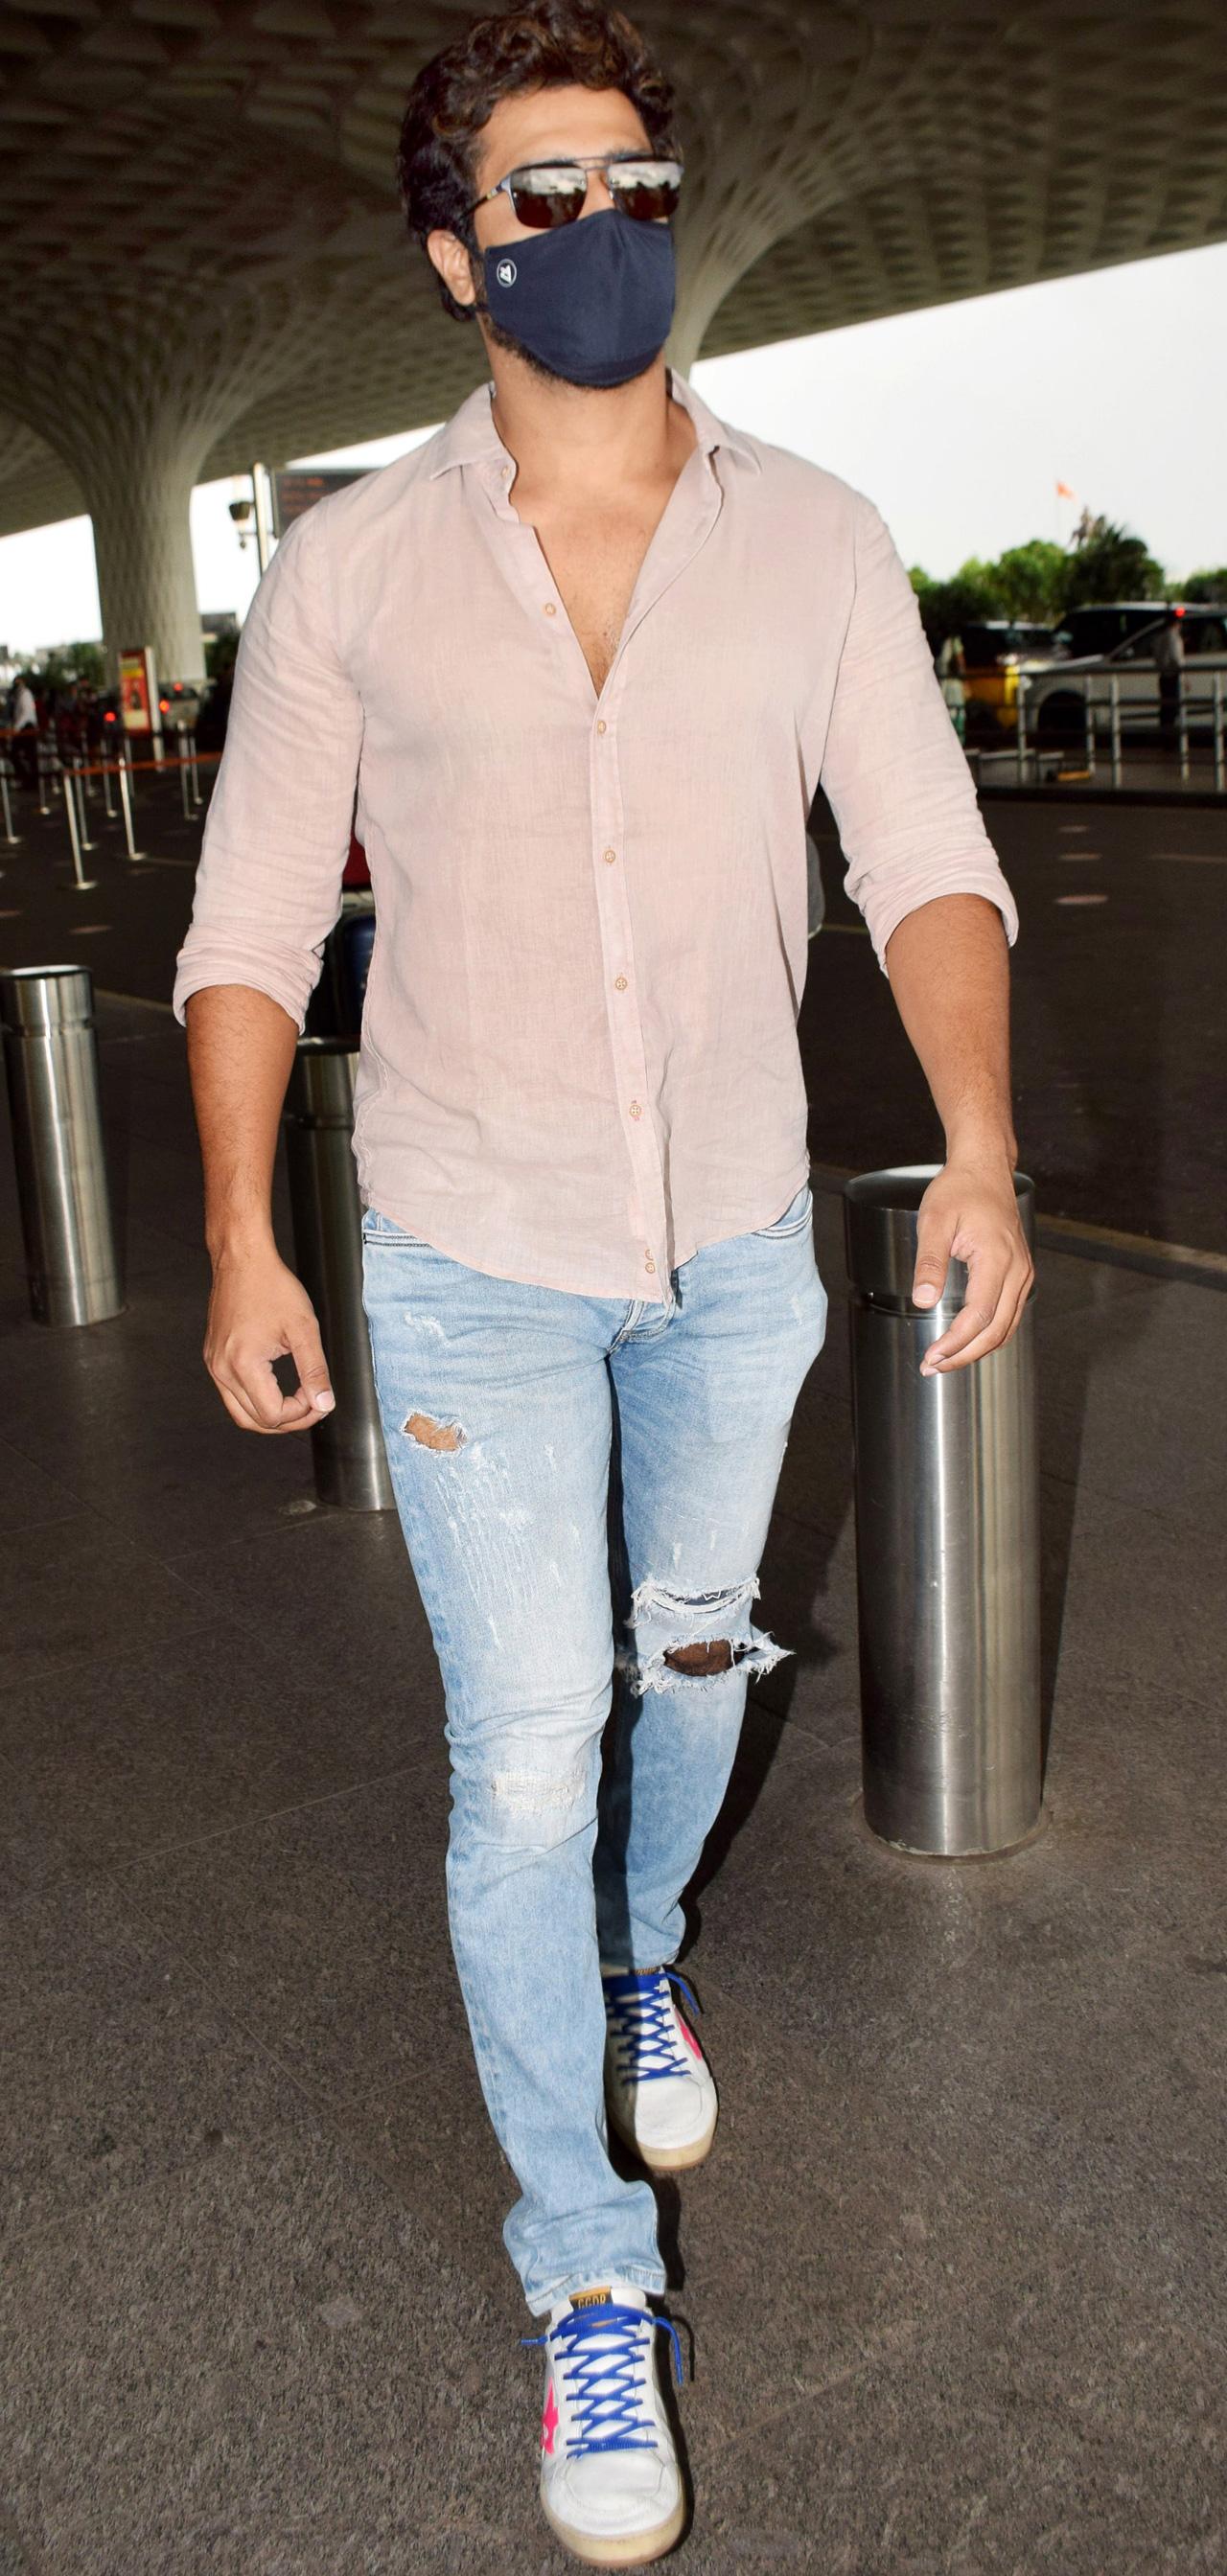 Vicky Kaushal was also spotted at Mumbai airport. On the work front, Vicky, who recently completed nine years in Bollywood, is busy working on Aditya Dhar's film 'The Immortal Ashwatthama'. He also has 'Sardar Udham Singh' and 'Mr Lele' in the pipeline. 